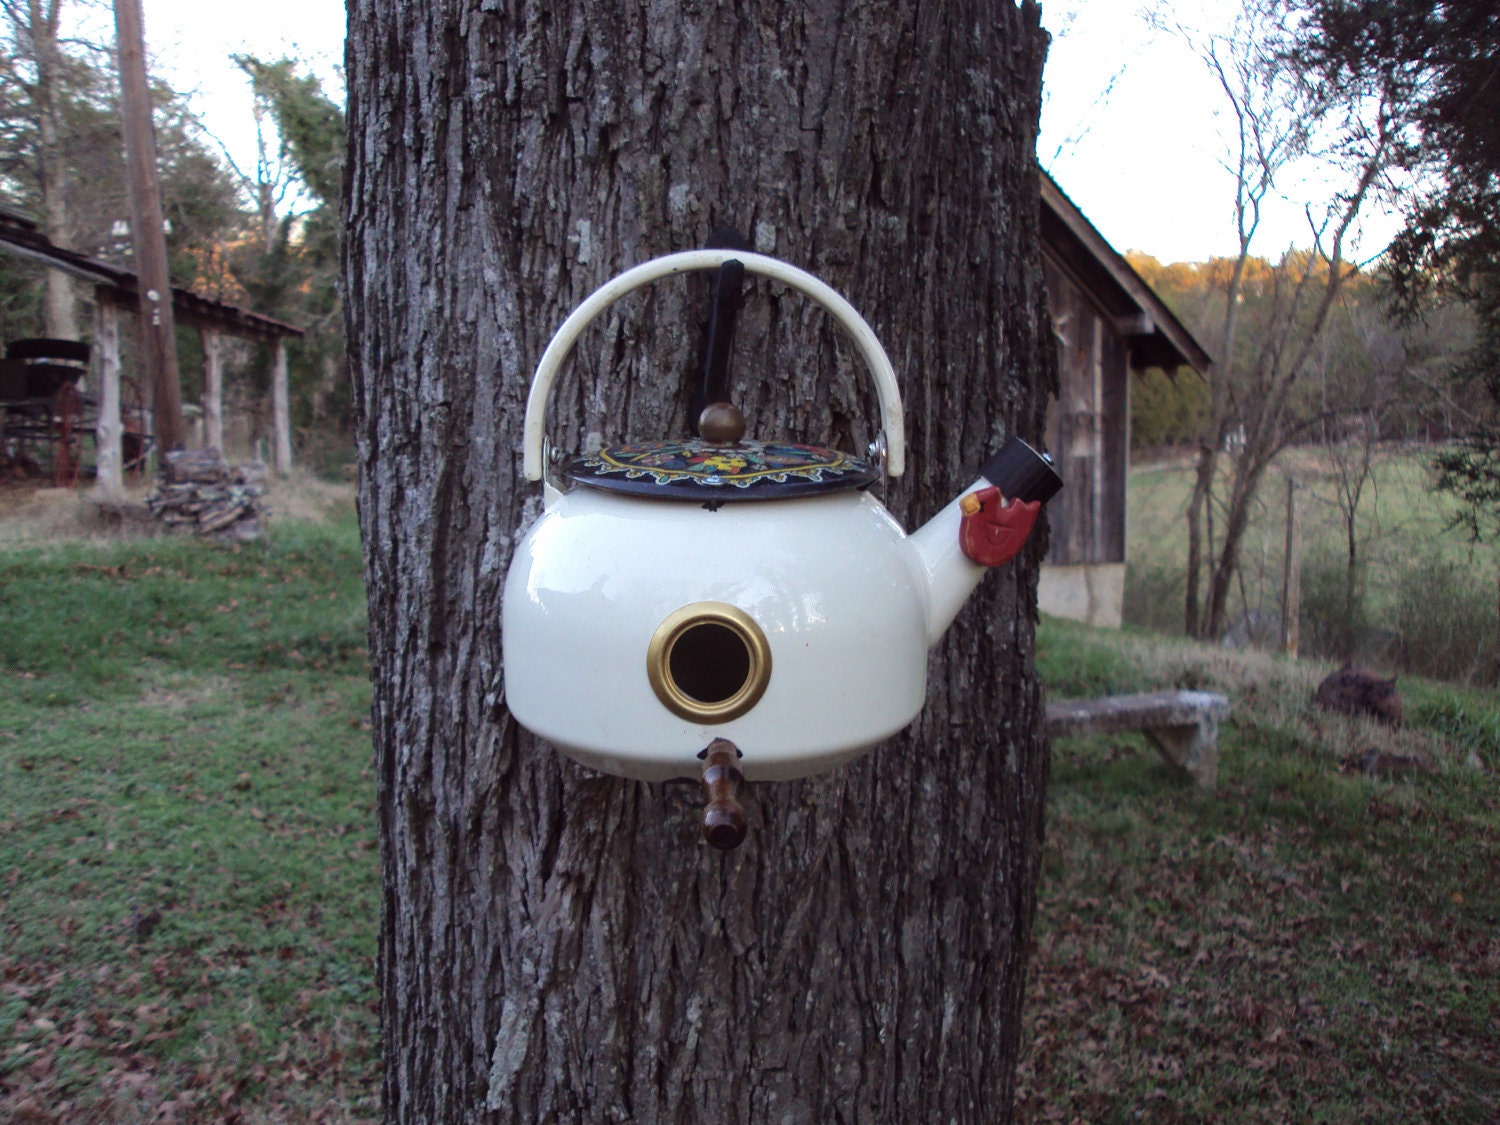 OOAK Birdhouse made from found/recycled items by tonyhowell